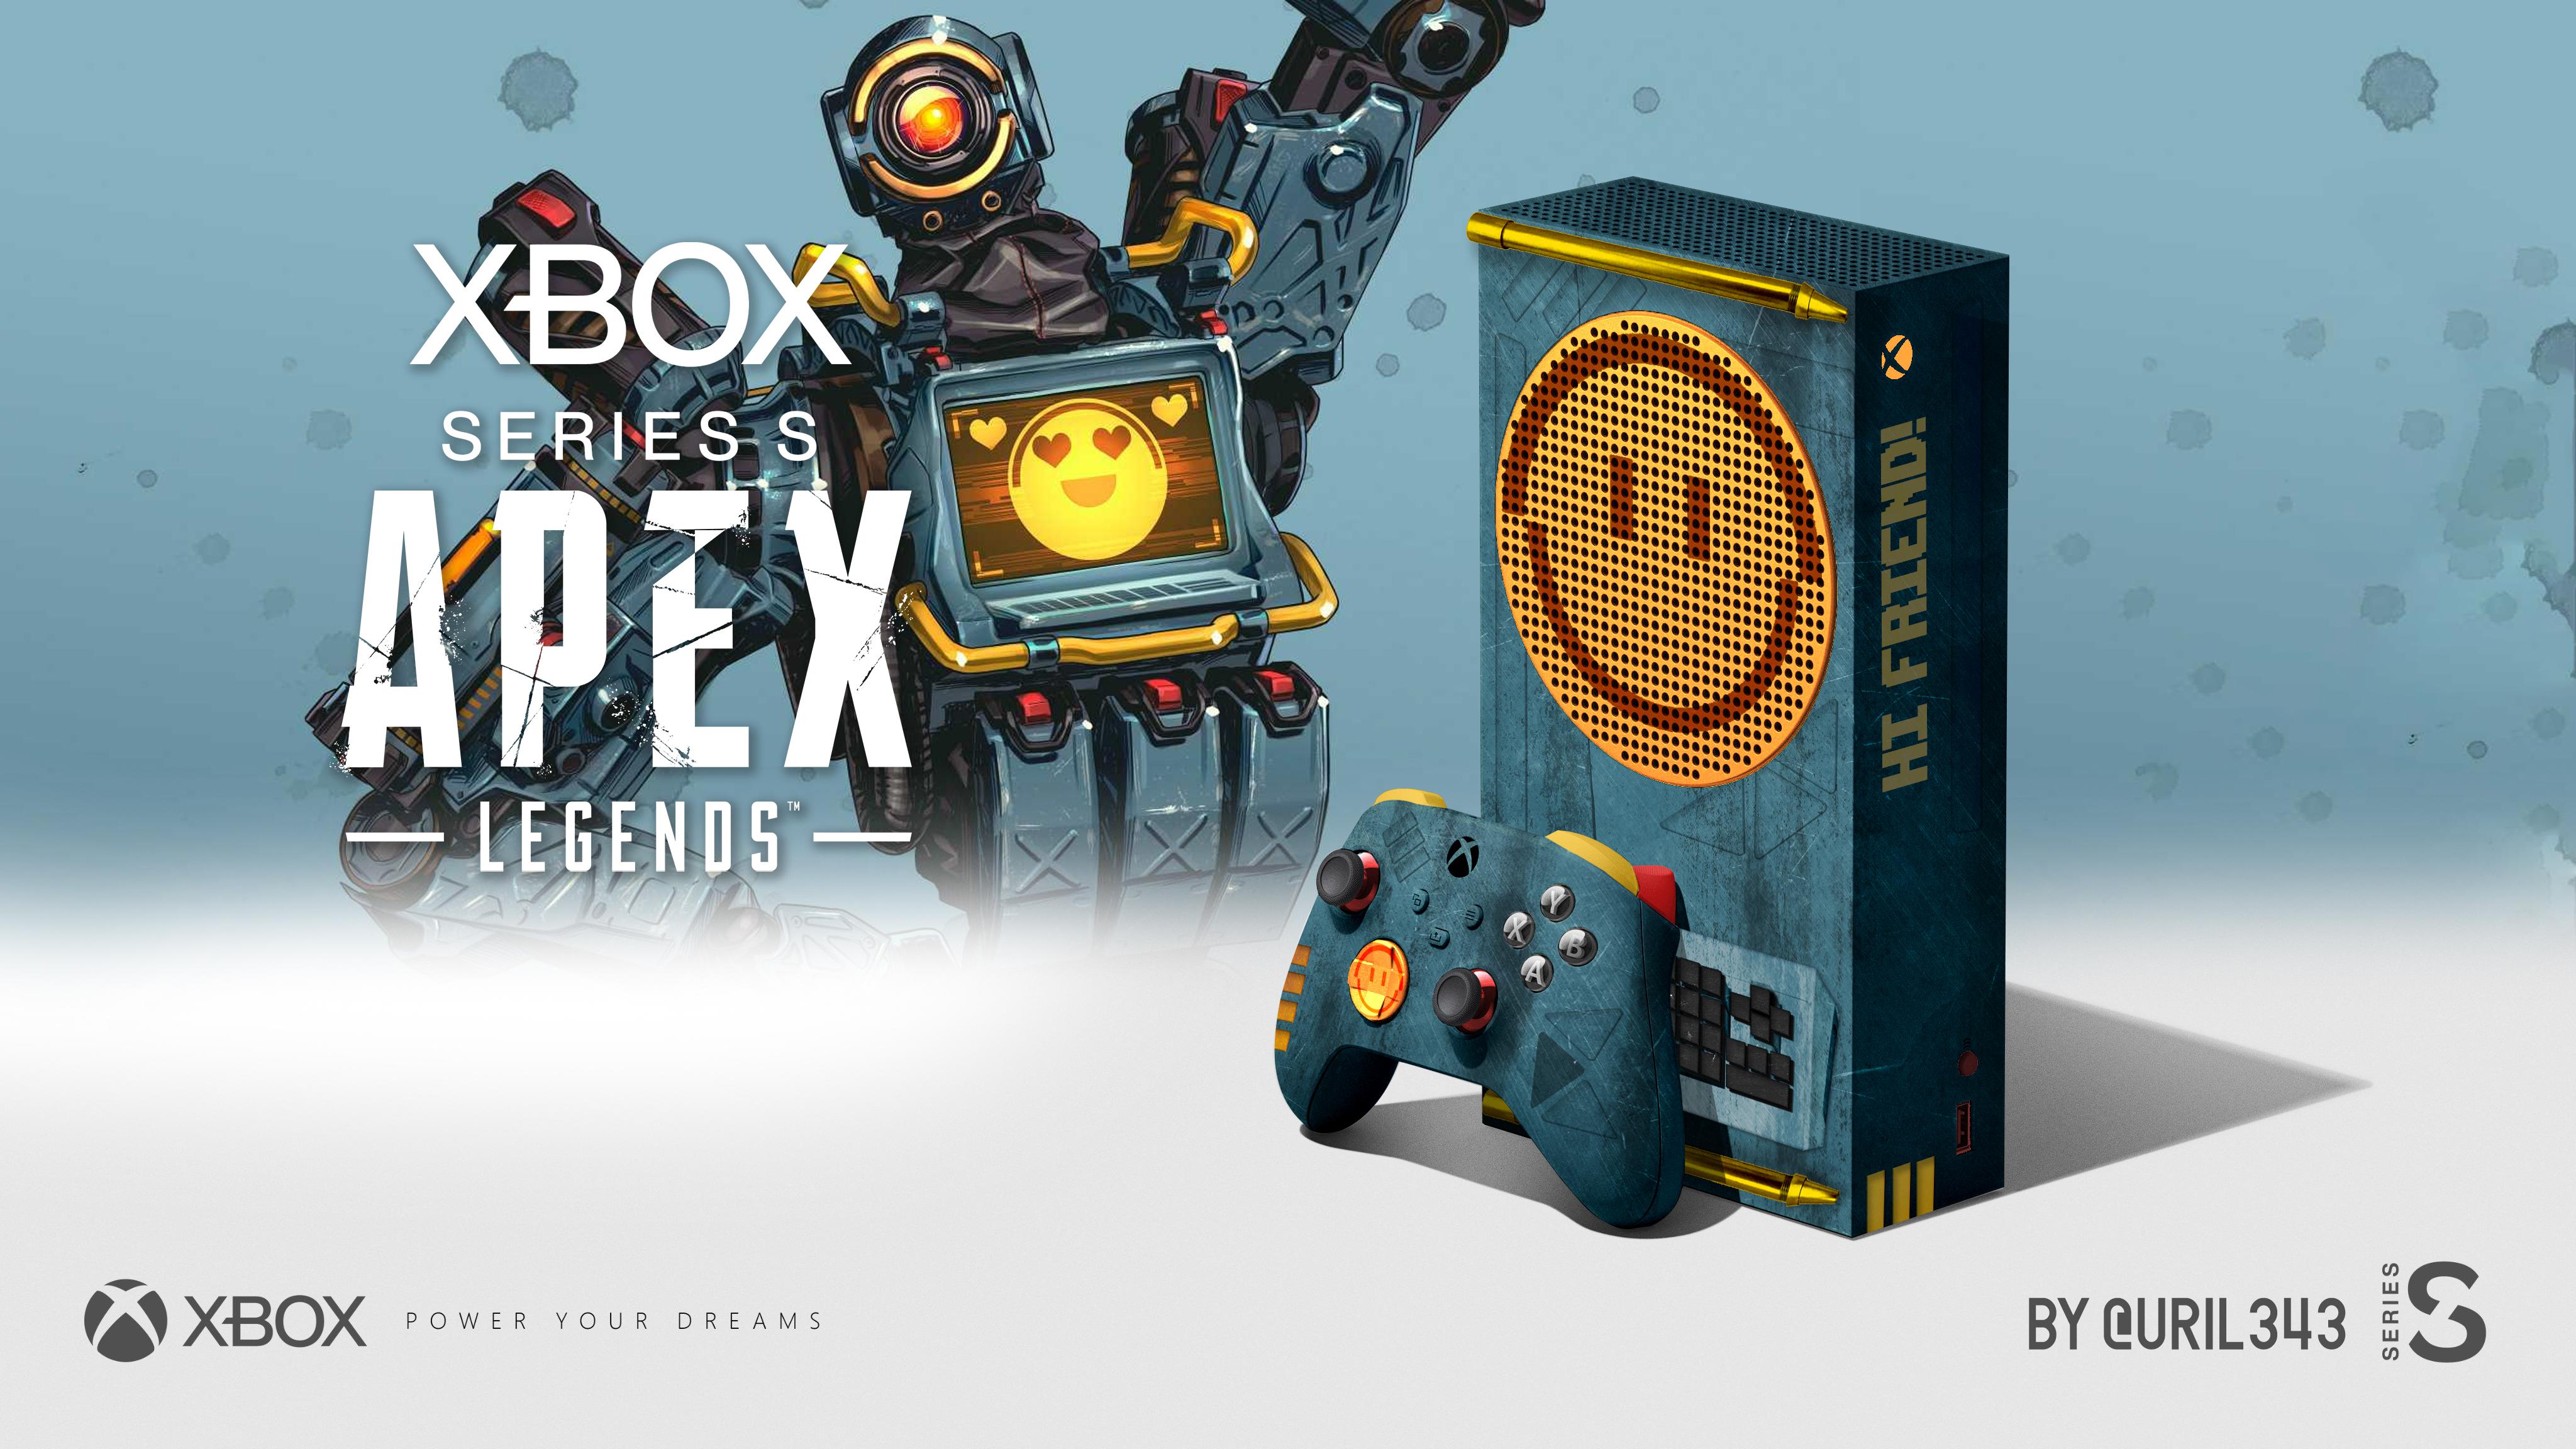 XB News (Not affiliated with Xbox) on X: "We don't remember an Apex Legends  edition Series S being announced, but we sure want one now.  https://t.co/R3j0asg7Nj" / X